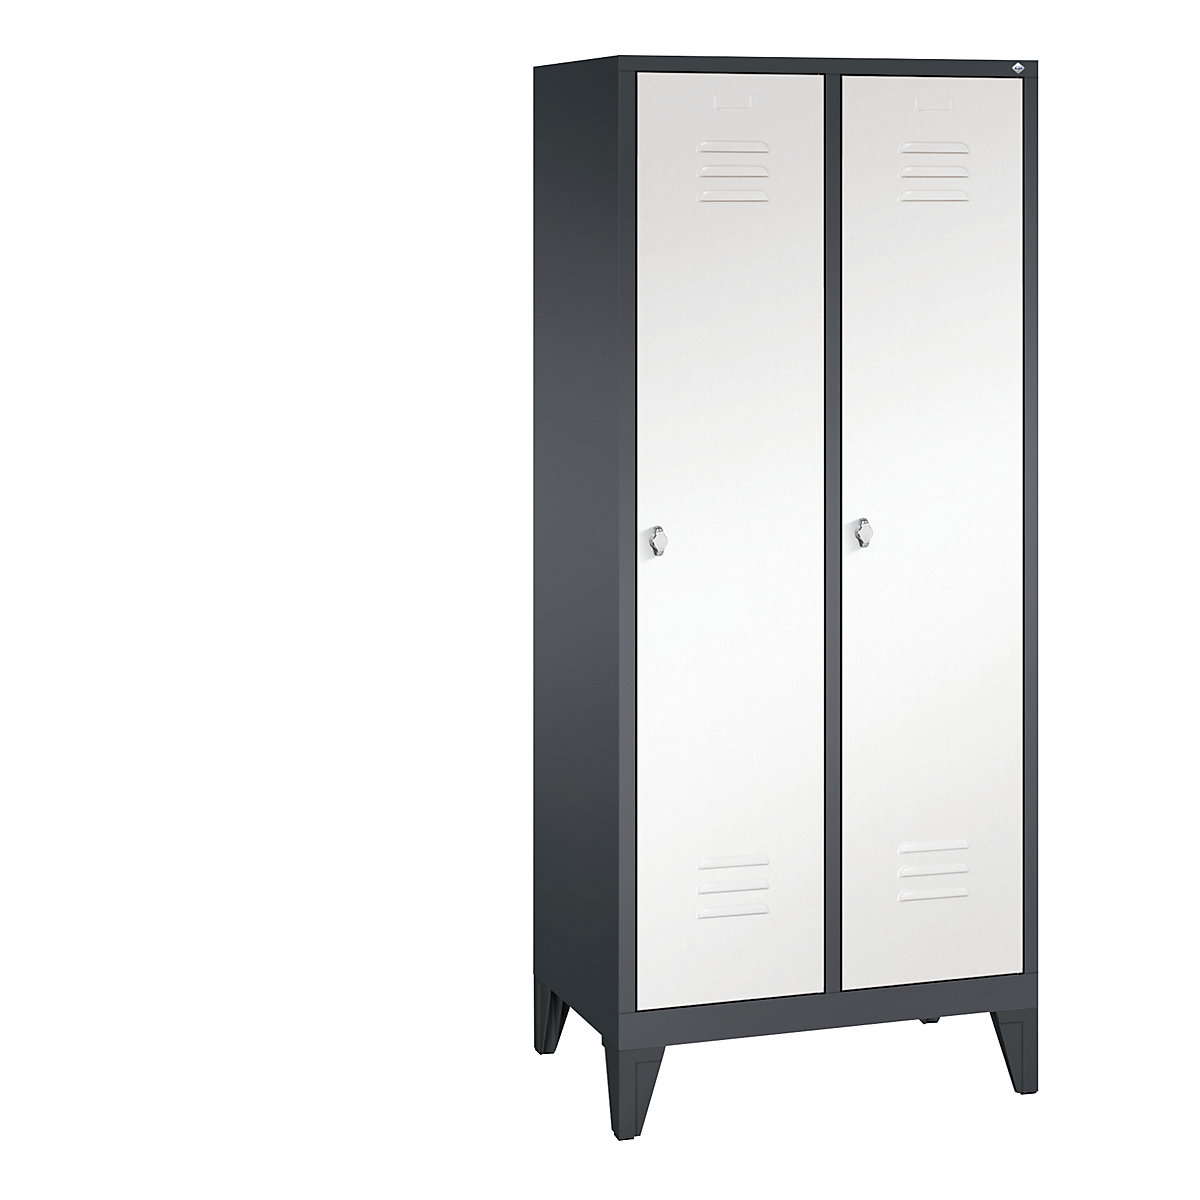 CLASSIC cloakroom locker with feet – C+P, 2 compartments, compartment width 400 mm, black grey / traffic white-12